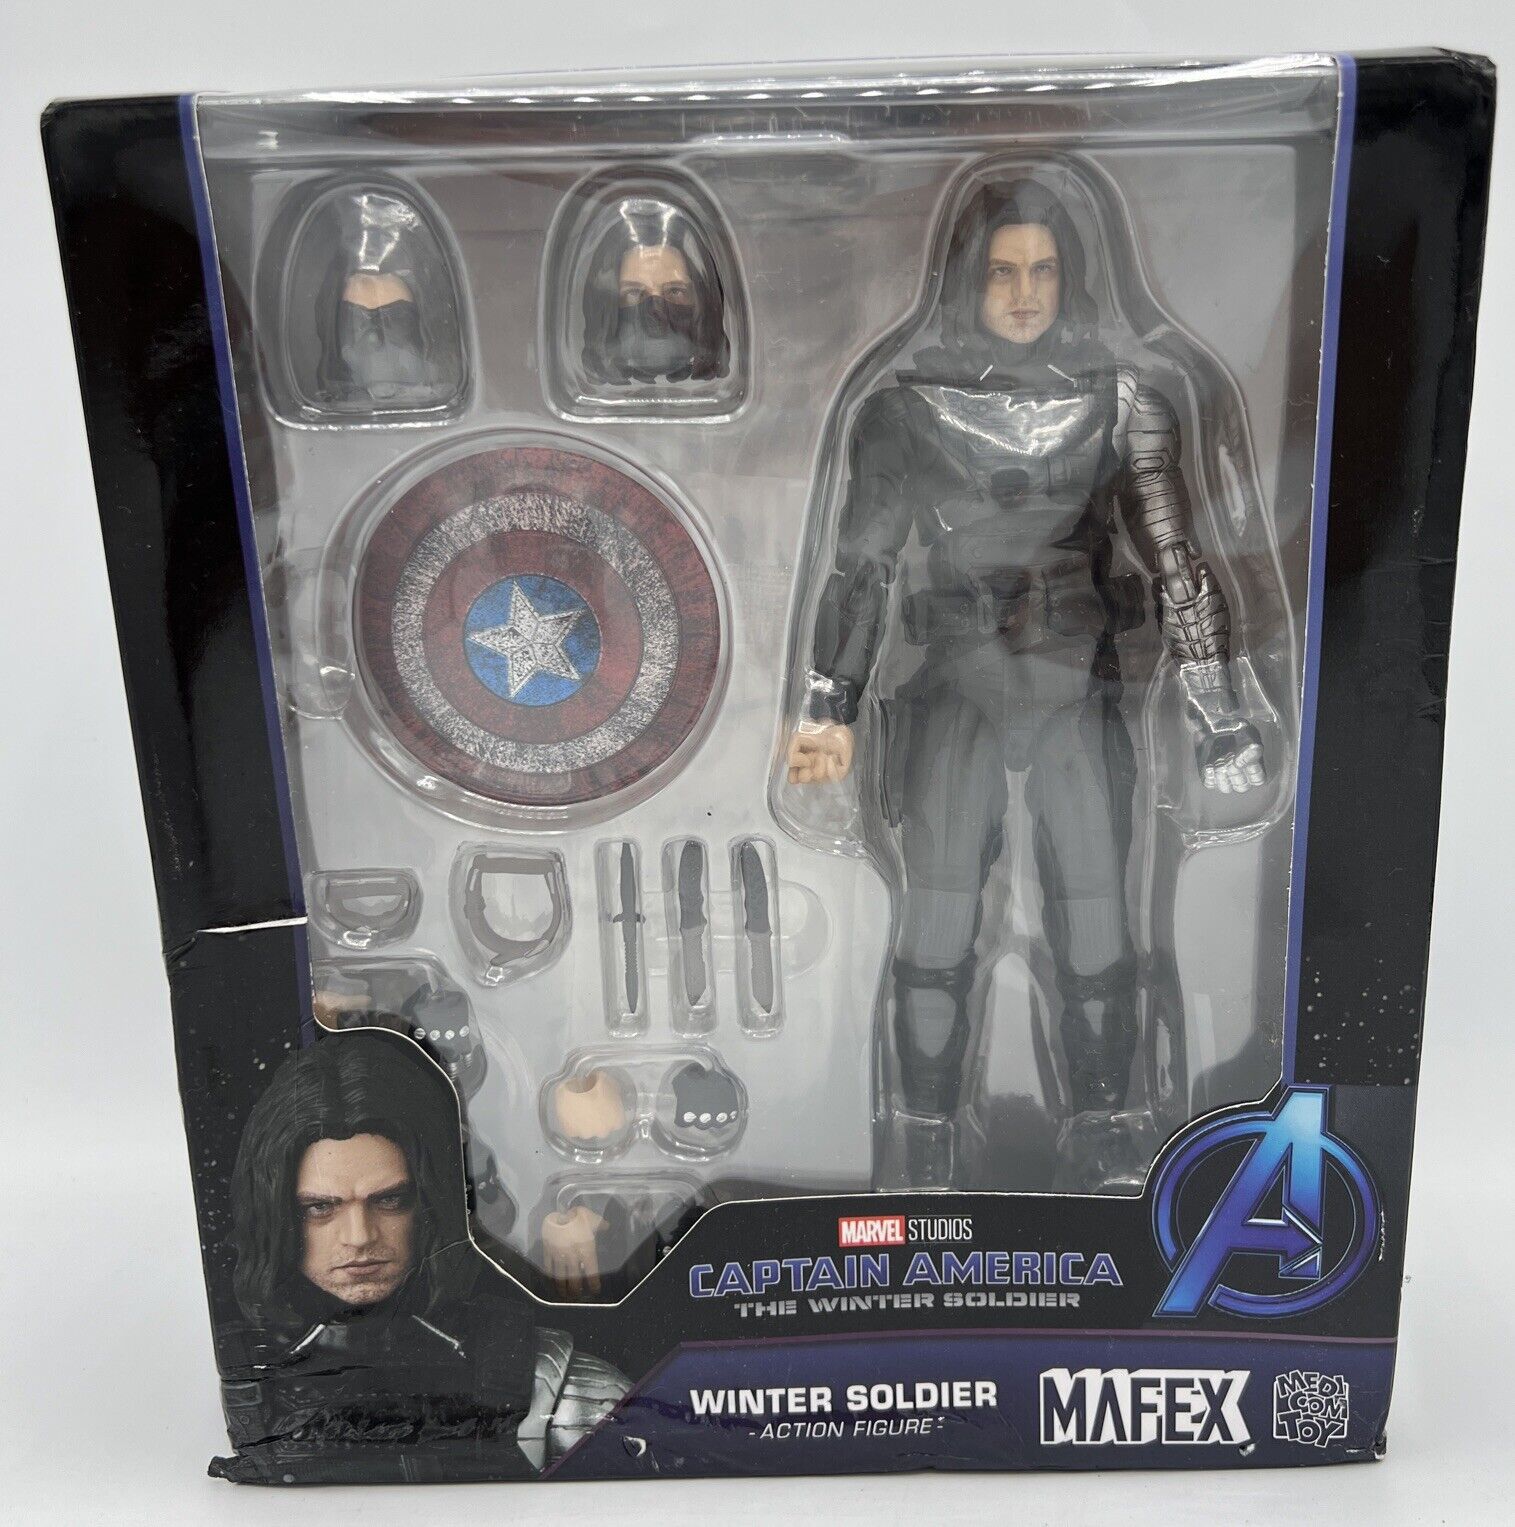 Medicom Toy Mafex No.203 Winter Soldier PVC Action Figure Marvel New